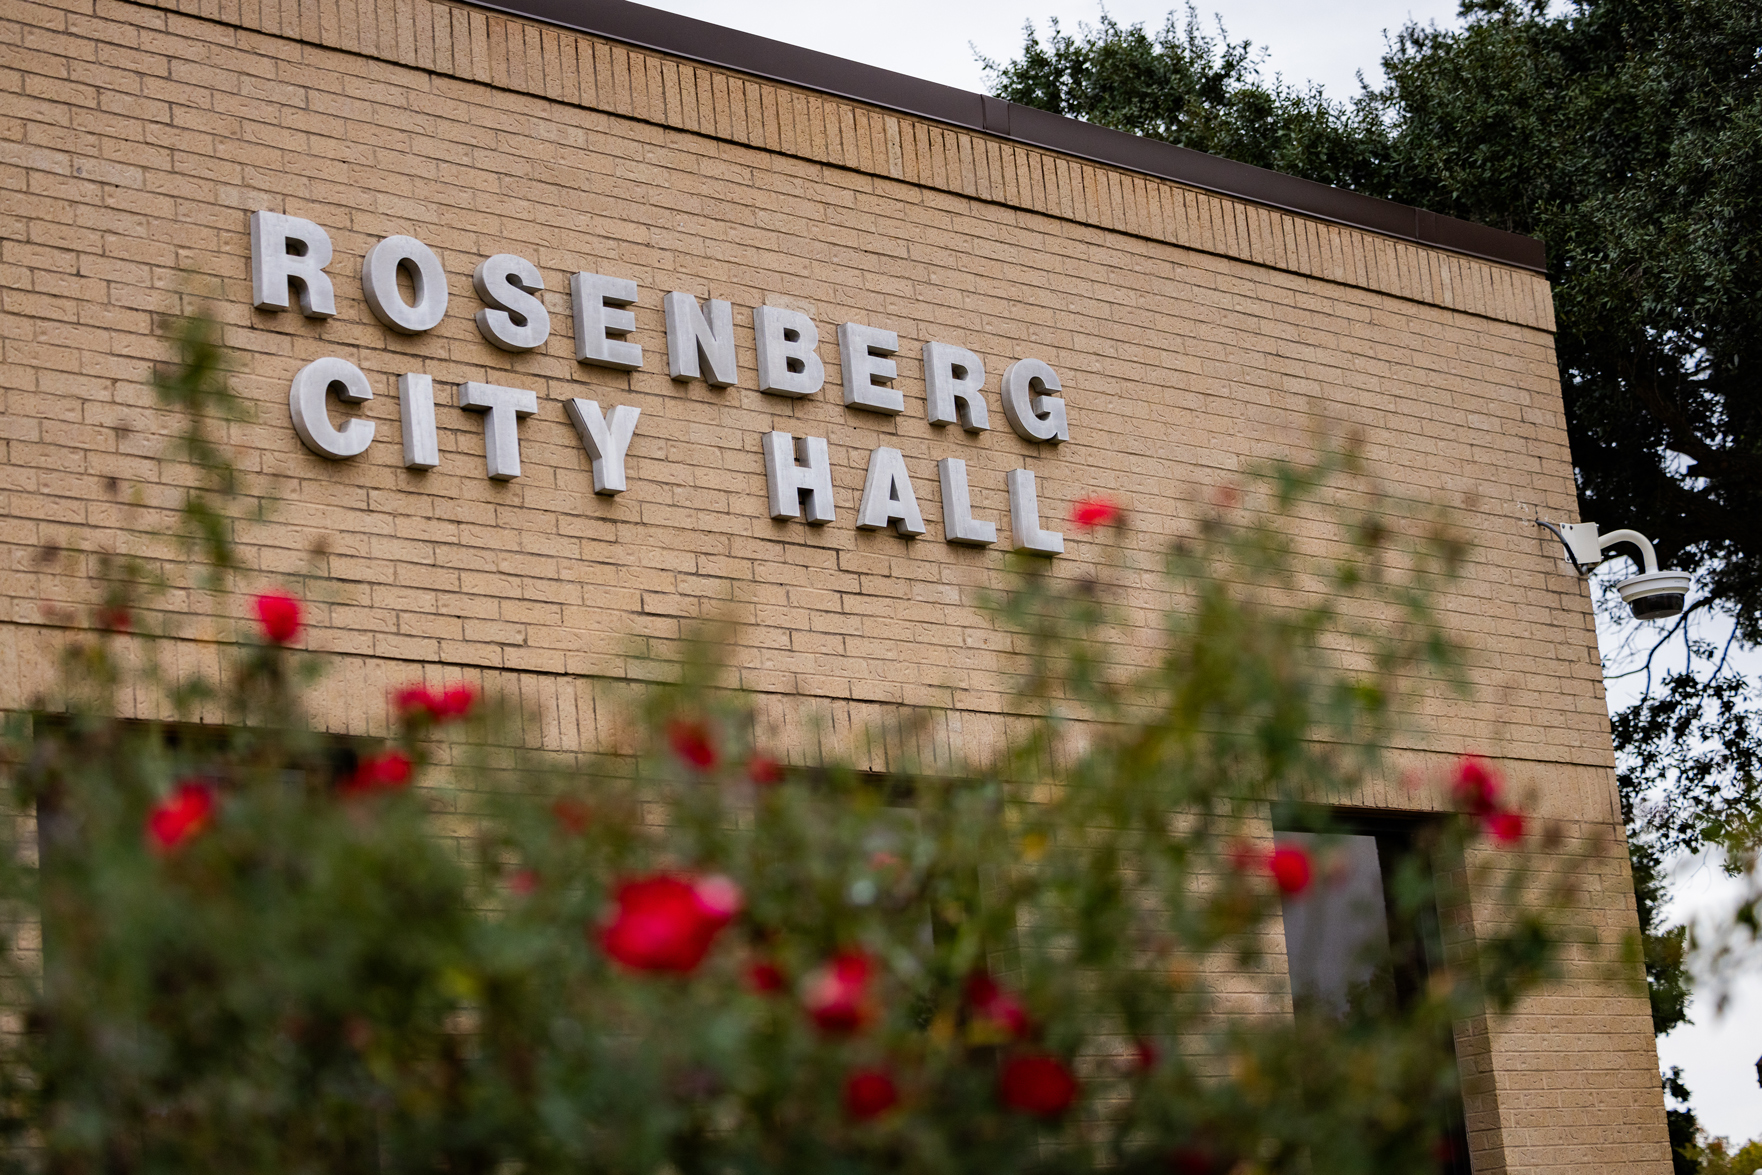 Exterior view of the Rosenberg City Hall